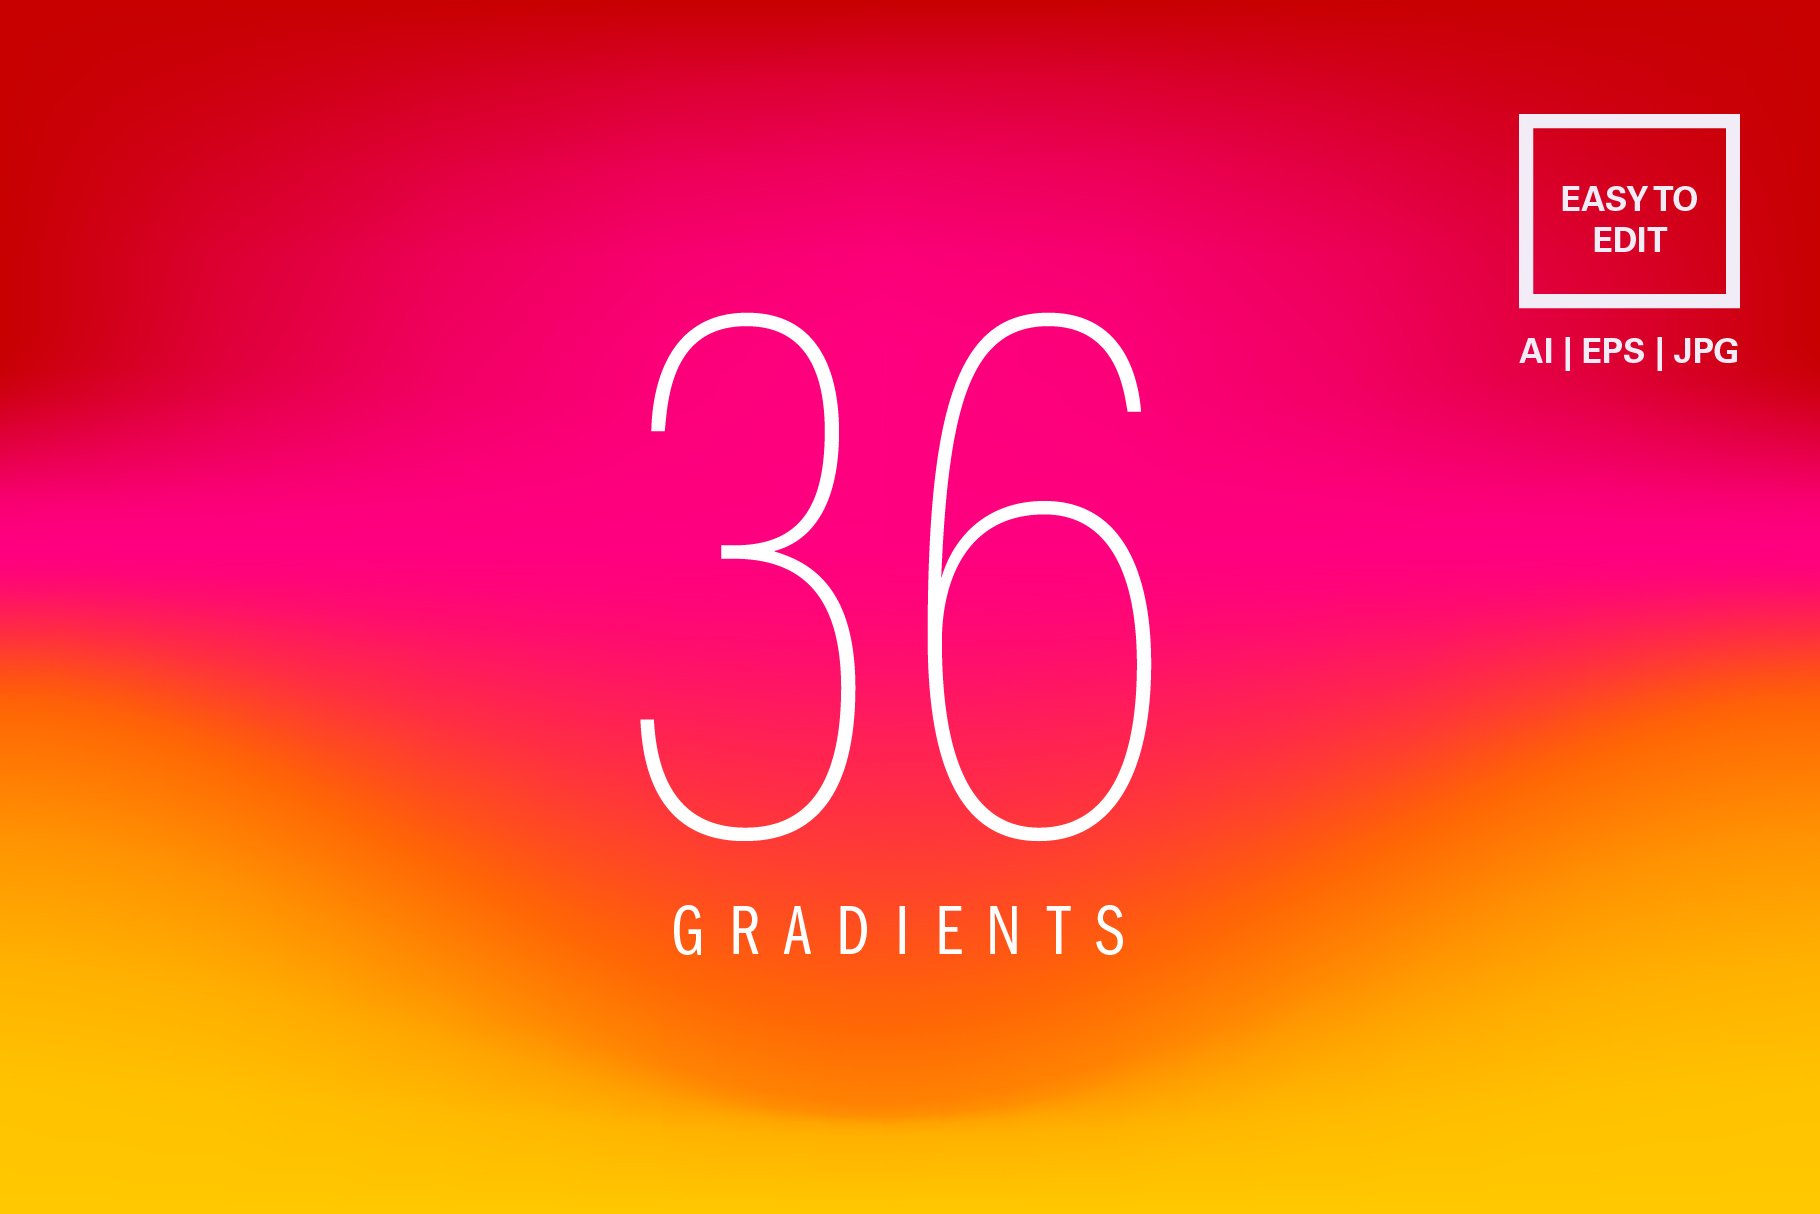 36 Gradients | Collection 2cover image.